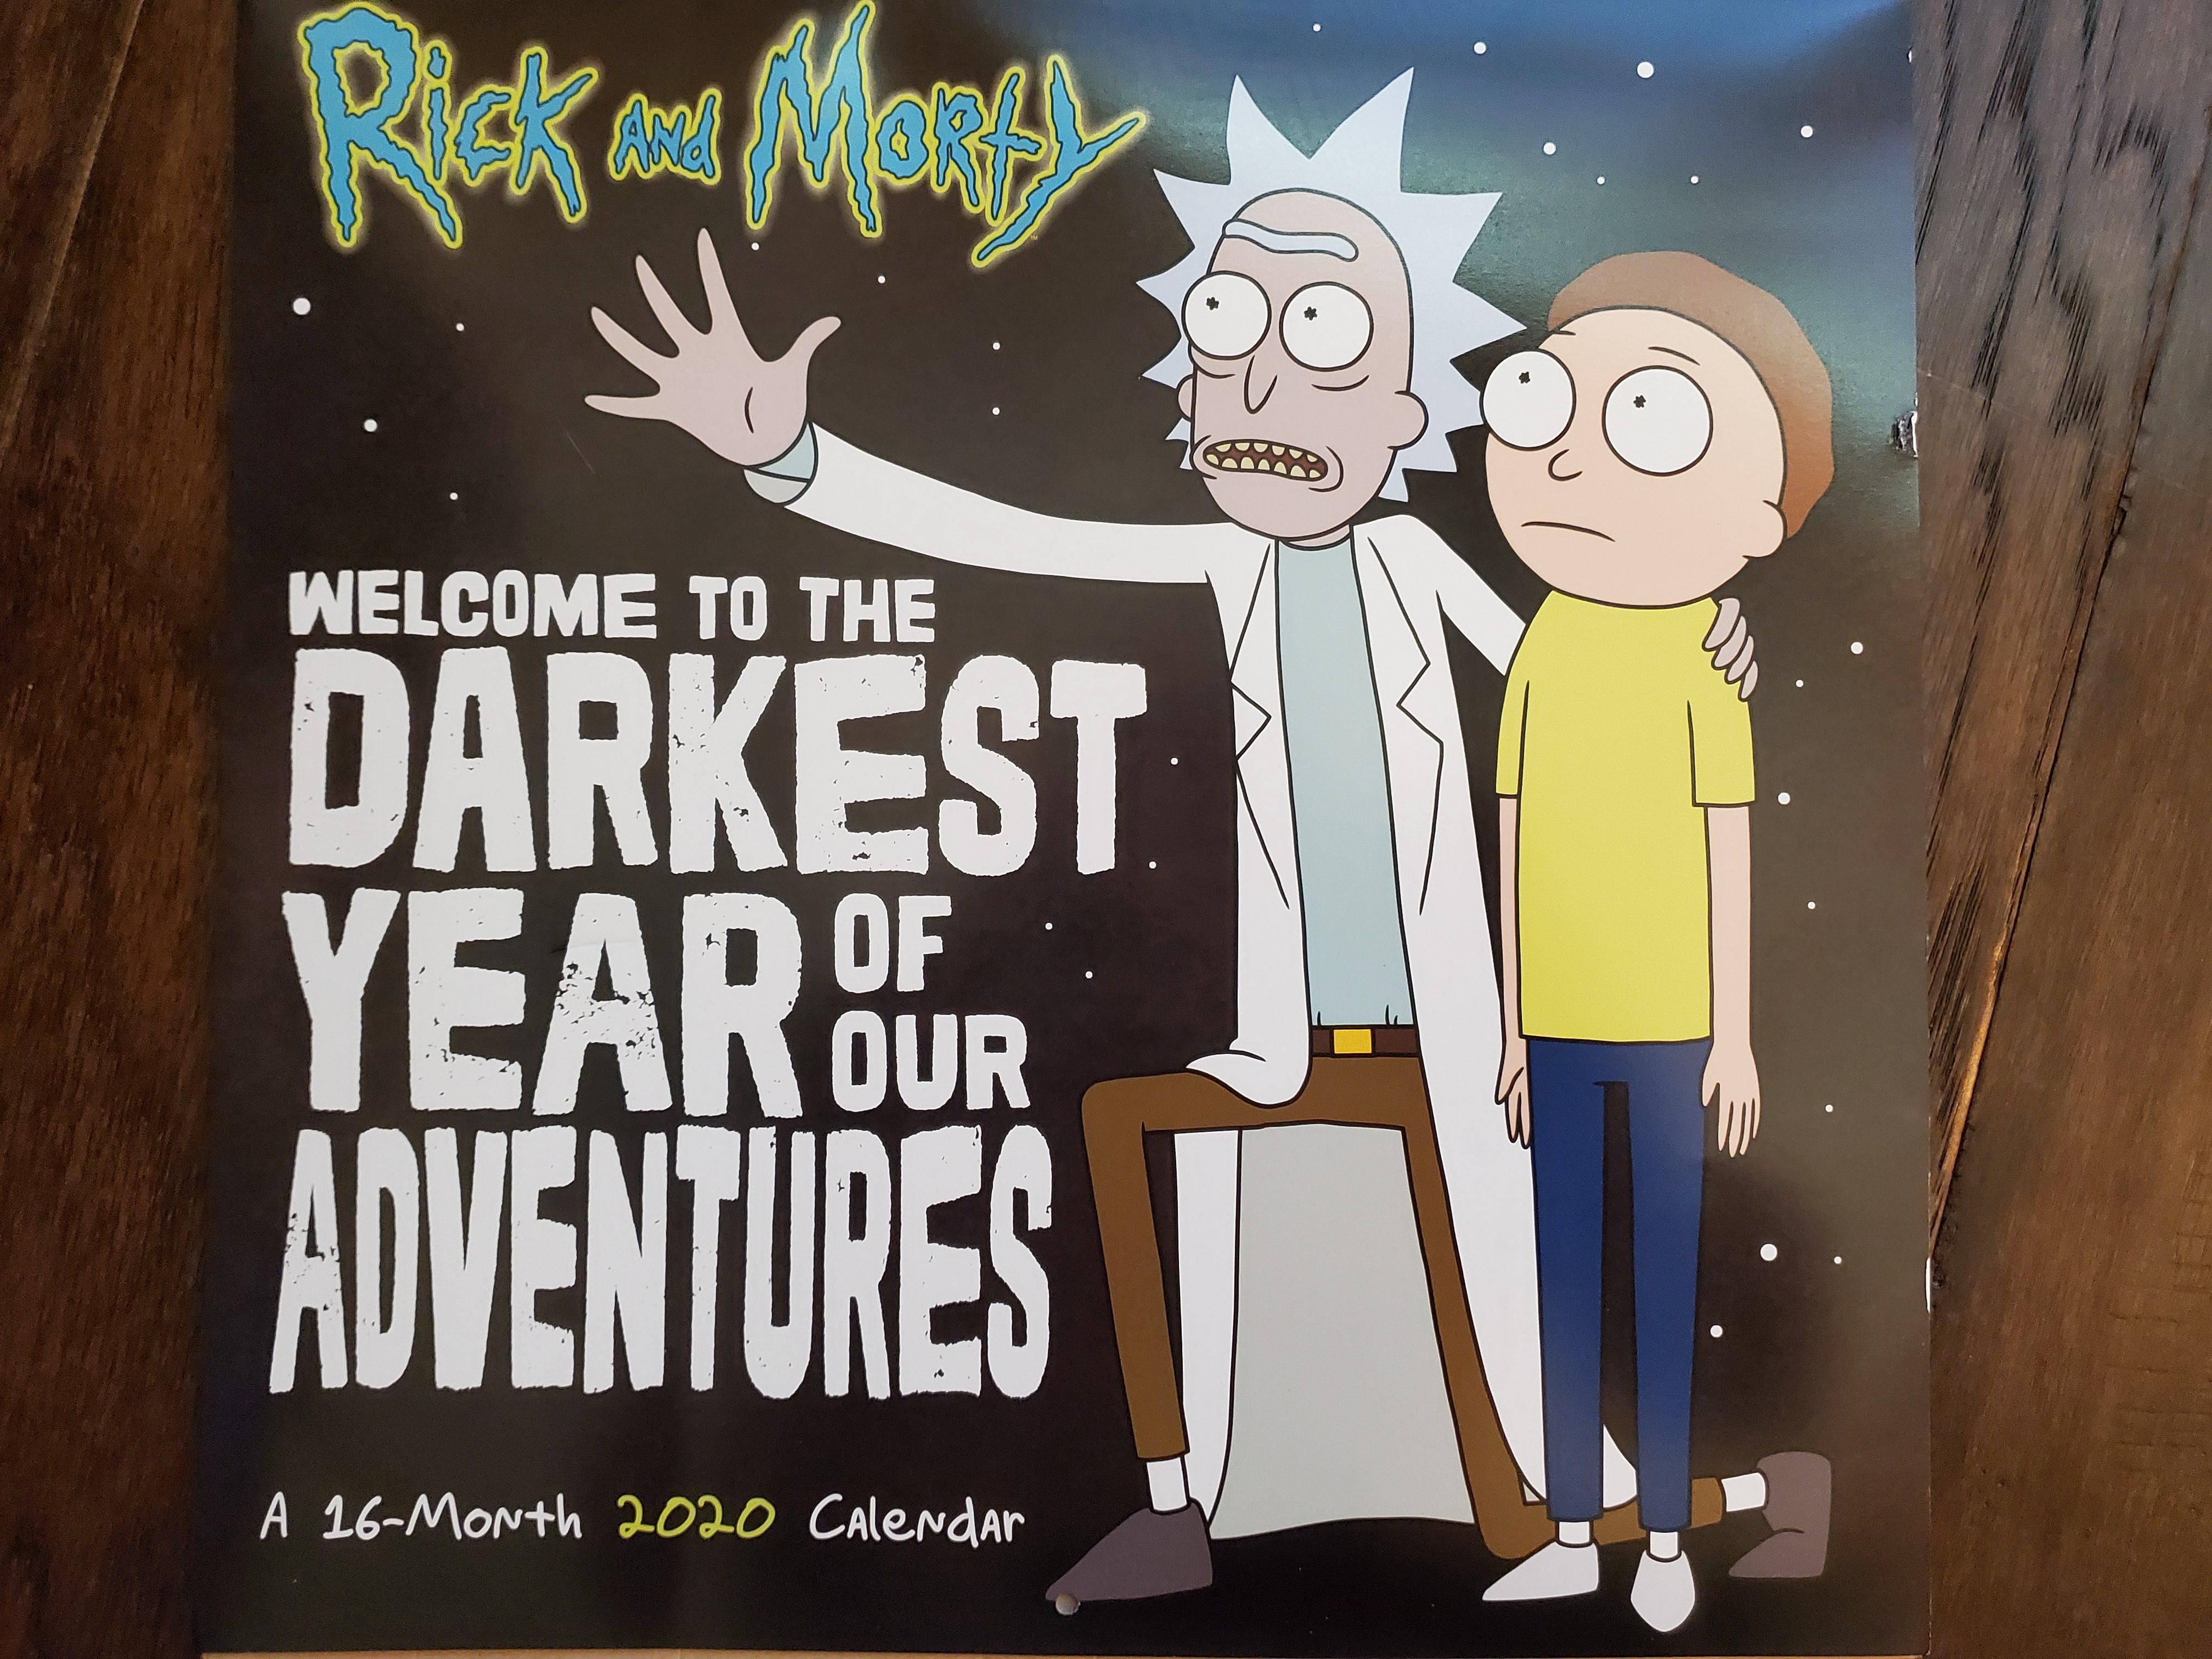 Rick and Morty nailed 2020 with this calendar title. It gets more appropriate every day.